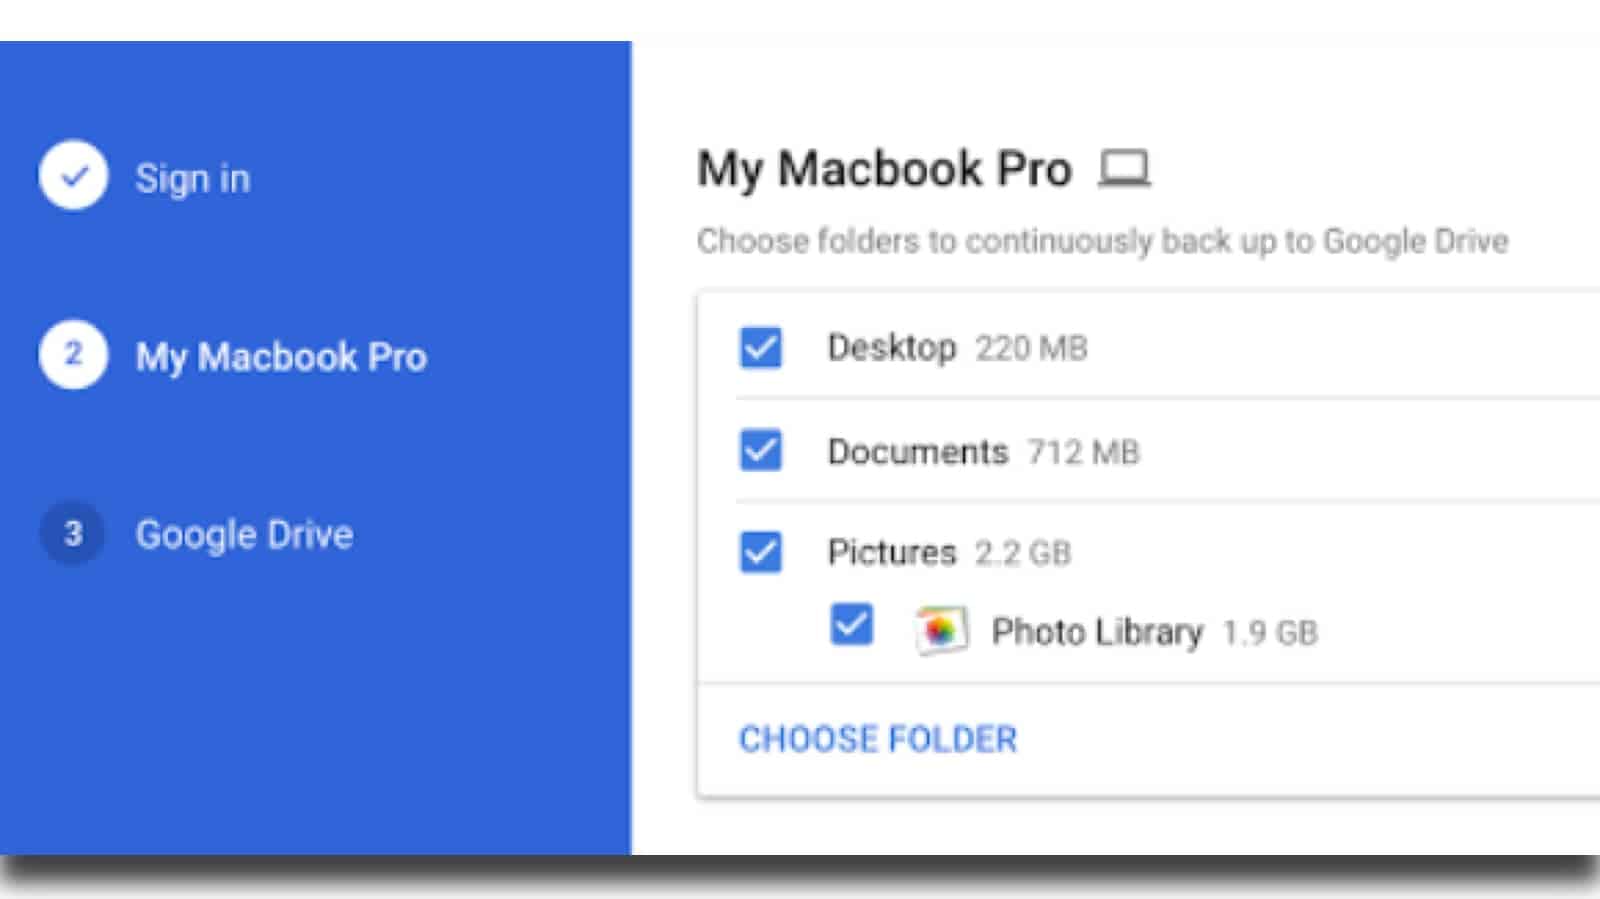 Back up desktop, documents, and photos in Google sync app. 